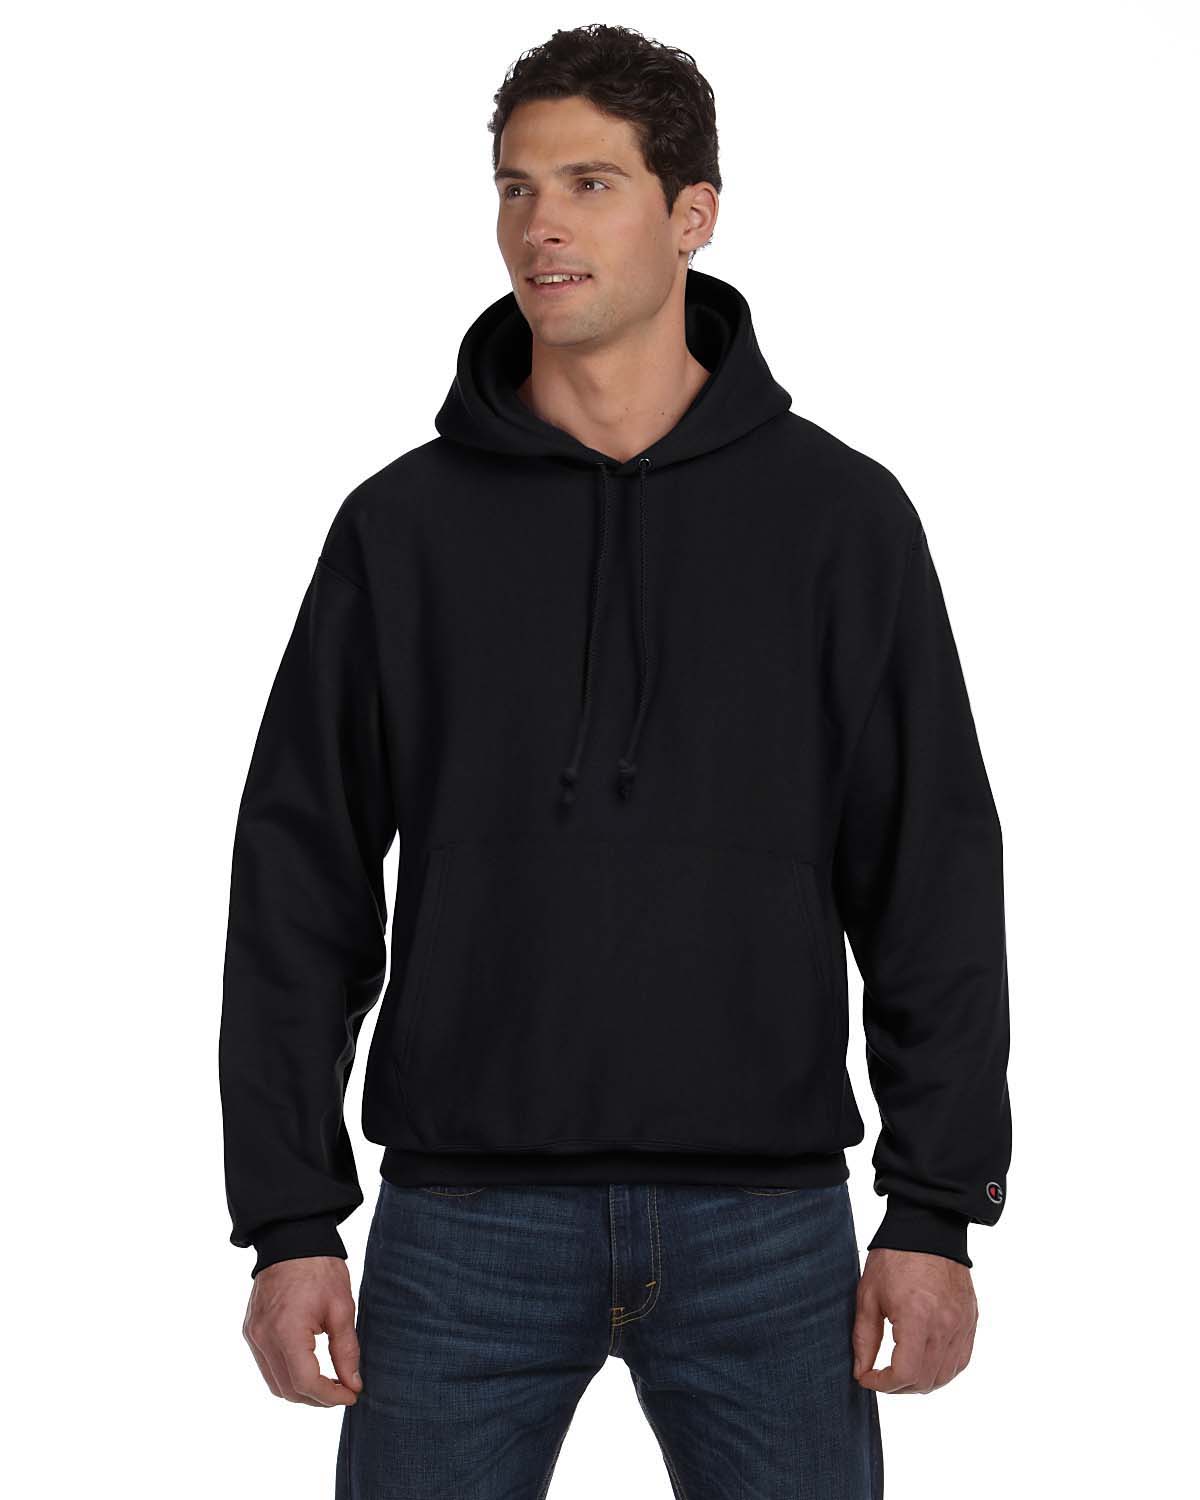 how to shrink a champion reverse weave hoodie